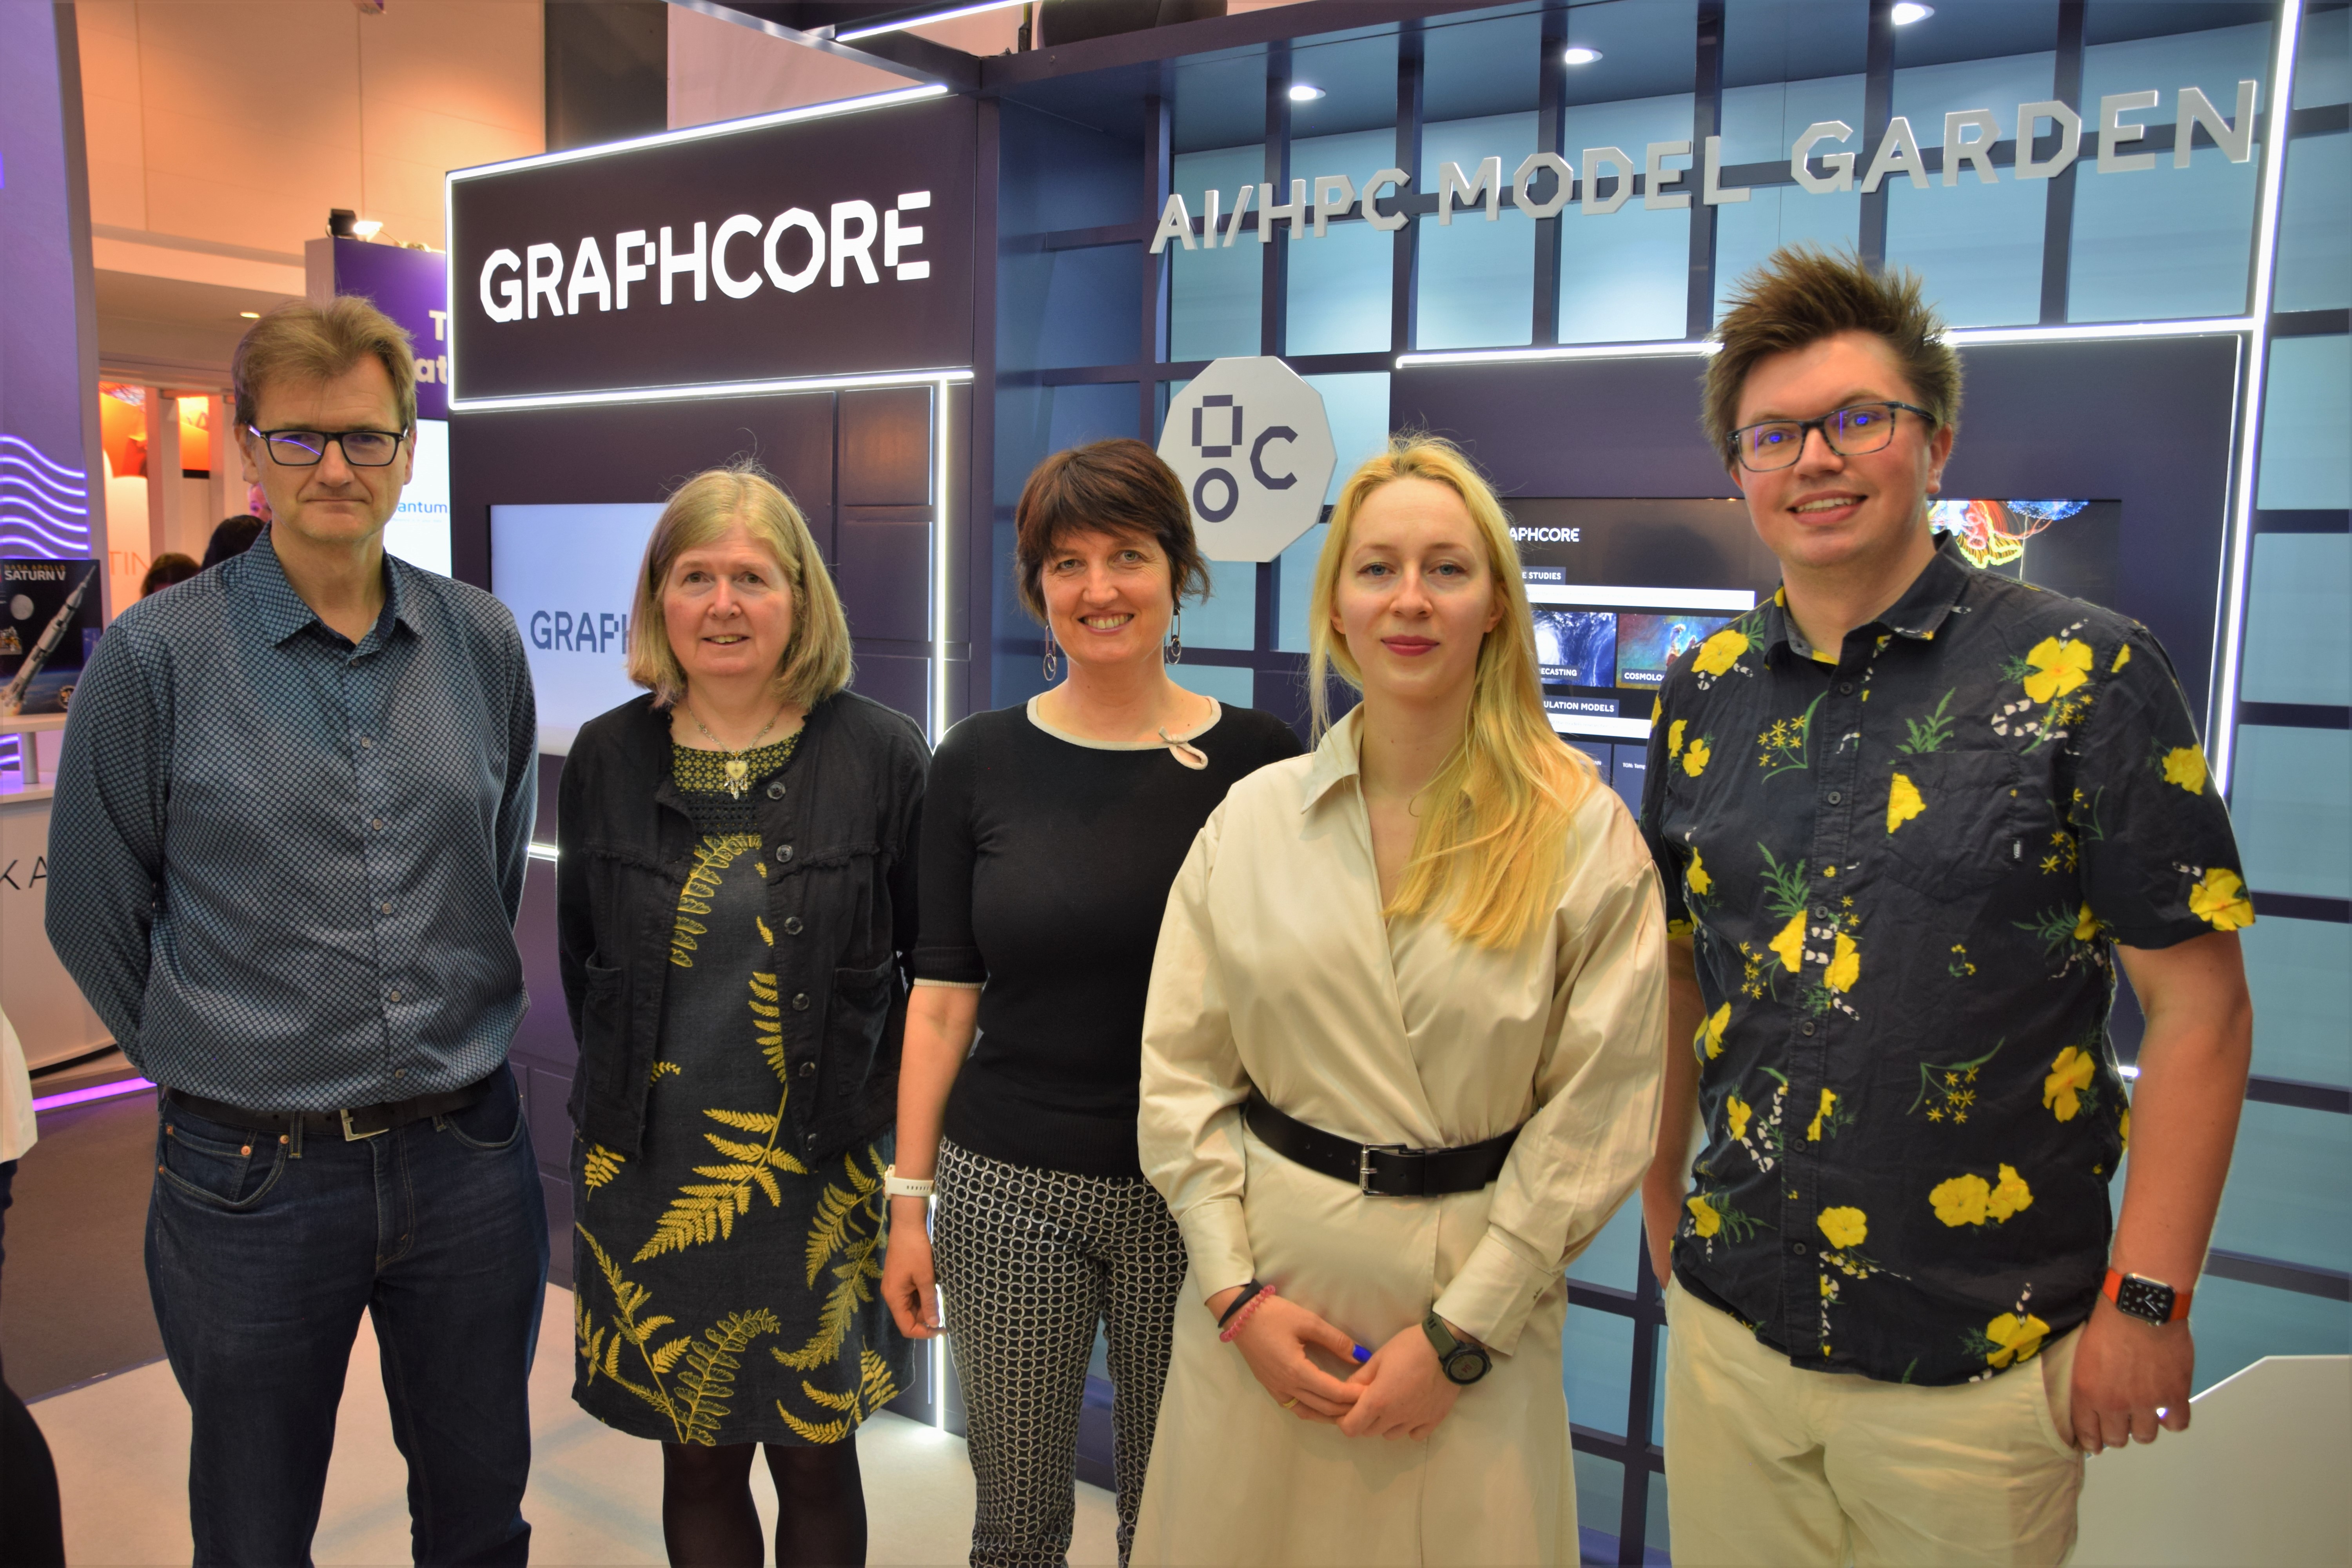 A group of two men and three women stand in front of the Graphcore exhibition stand at a conference.